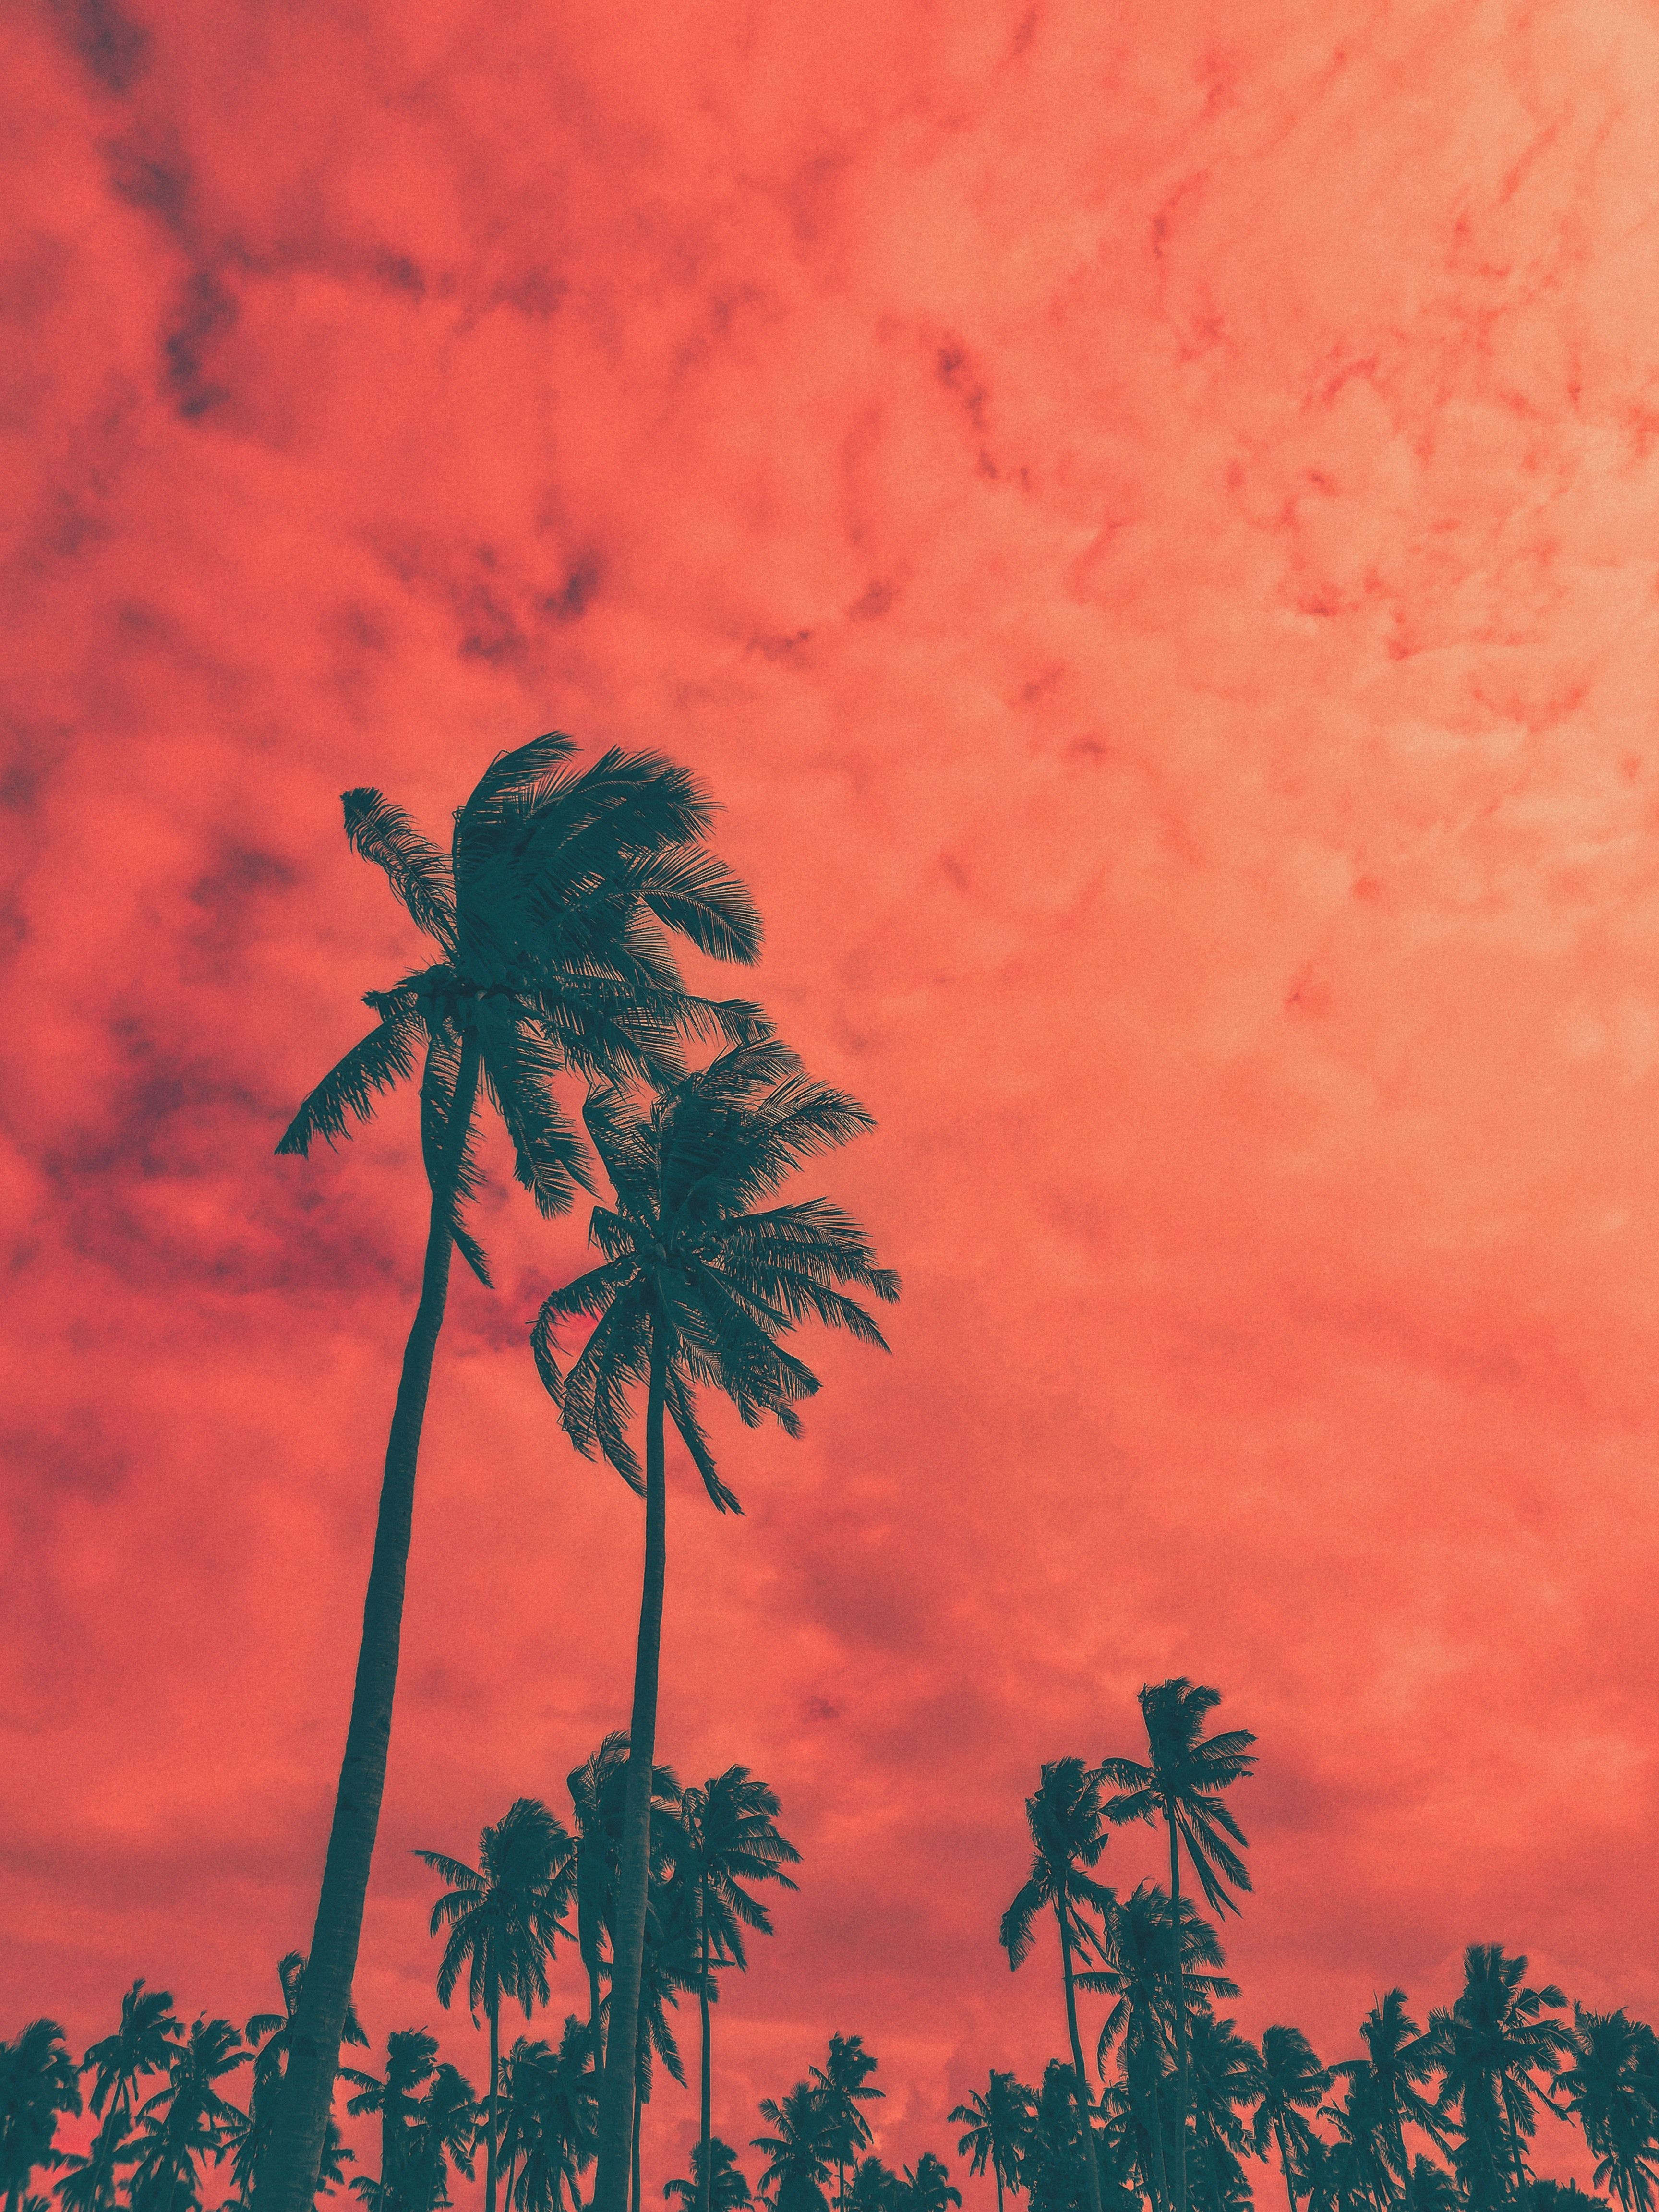 A red sky with palm trees in the foreground - Coconut